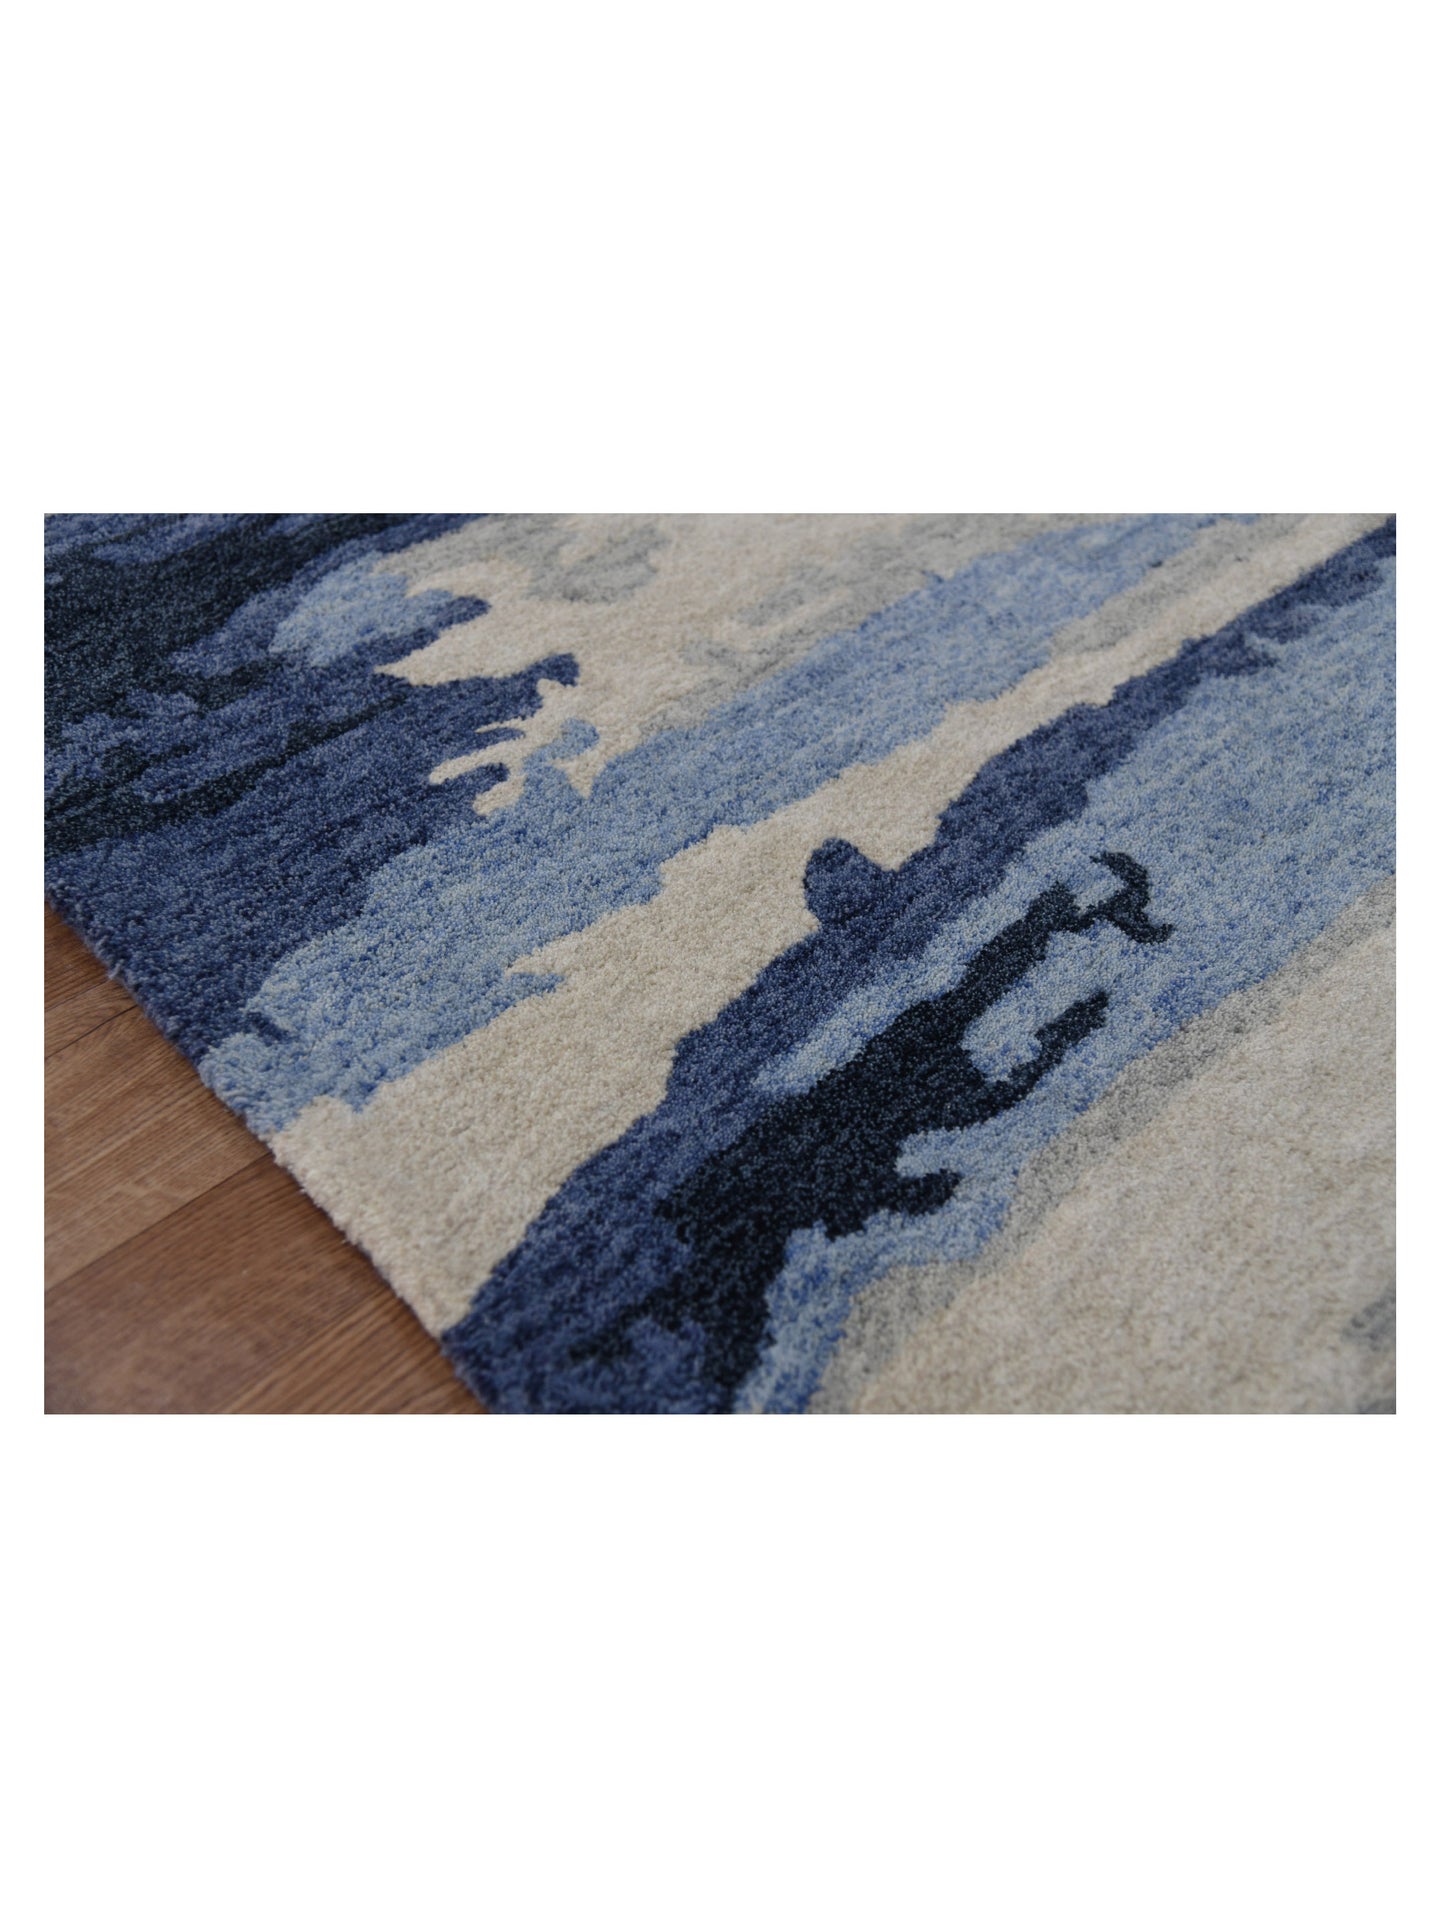 Limited ADELAIDE AD-107 NAVY  Transitional Tufted Rug